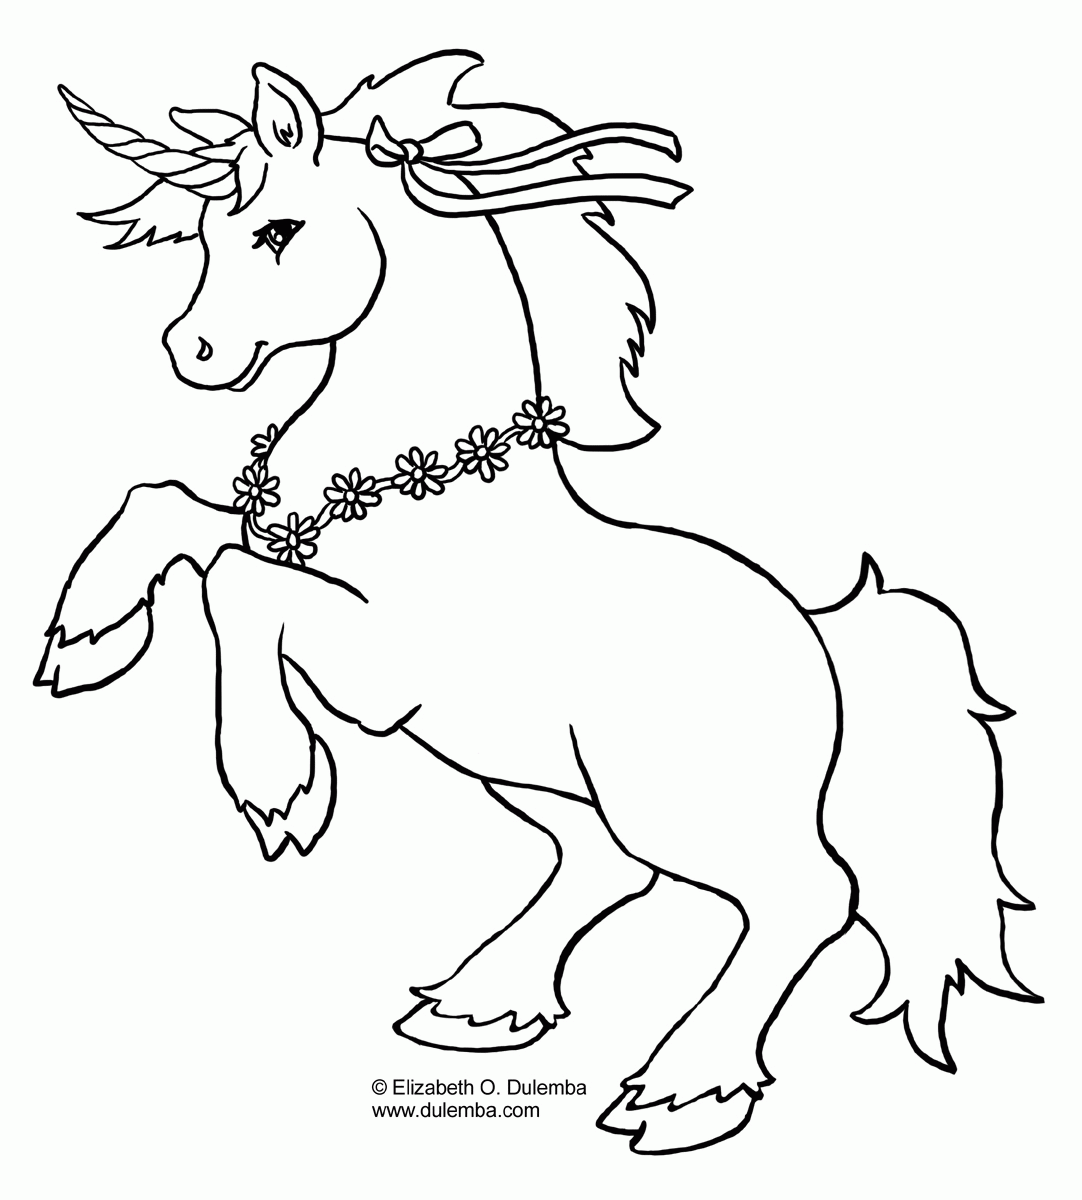 Unicorn Coloring Pages To Download And Print For Free   Coloring Home